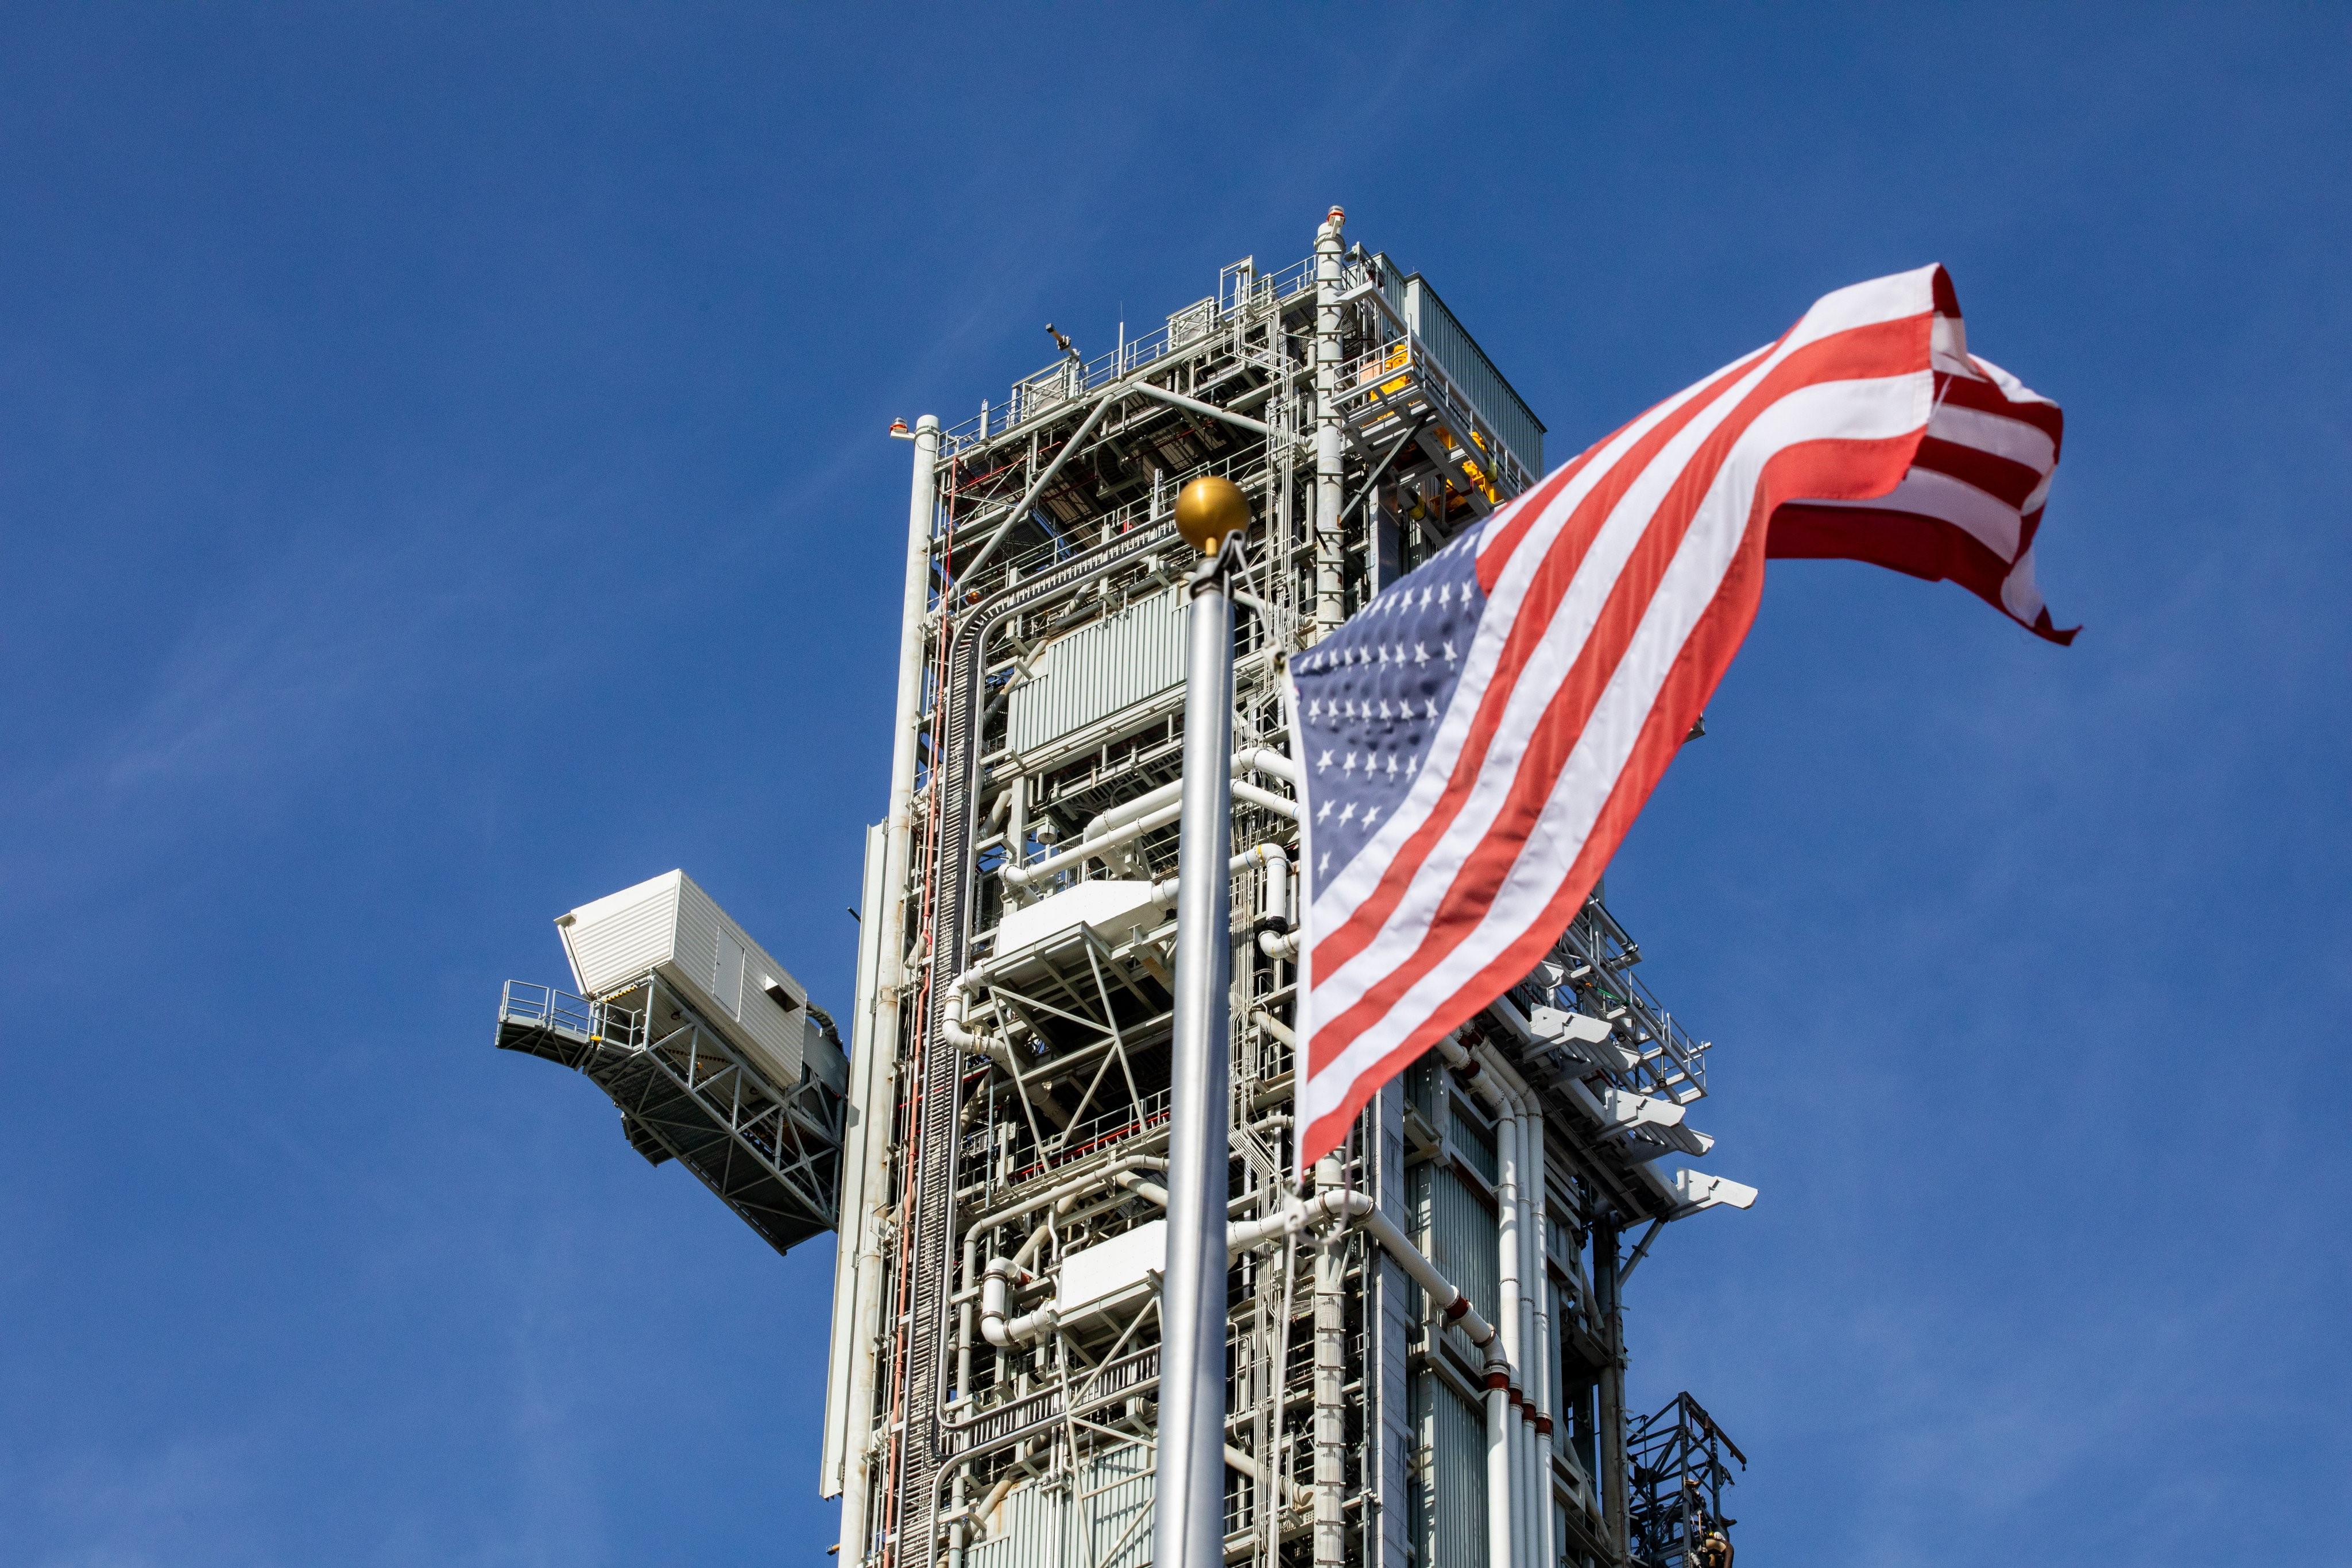 Mobile launcher 1 is seen in the background while an American flag is flying in the wind in the foreground. The crawler is carrying the mobile launcher 1 from the park site to Launch Pad 39B. The sky is partly cloudy and blue. Mobile launcher 1 has the crew access arm showing to the left and many intricate pieces are seen throughout.